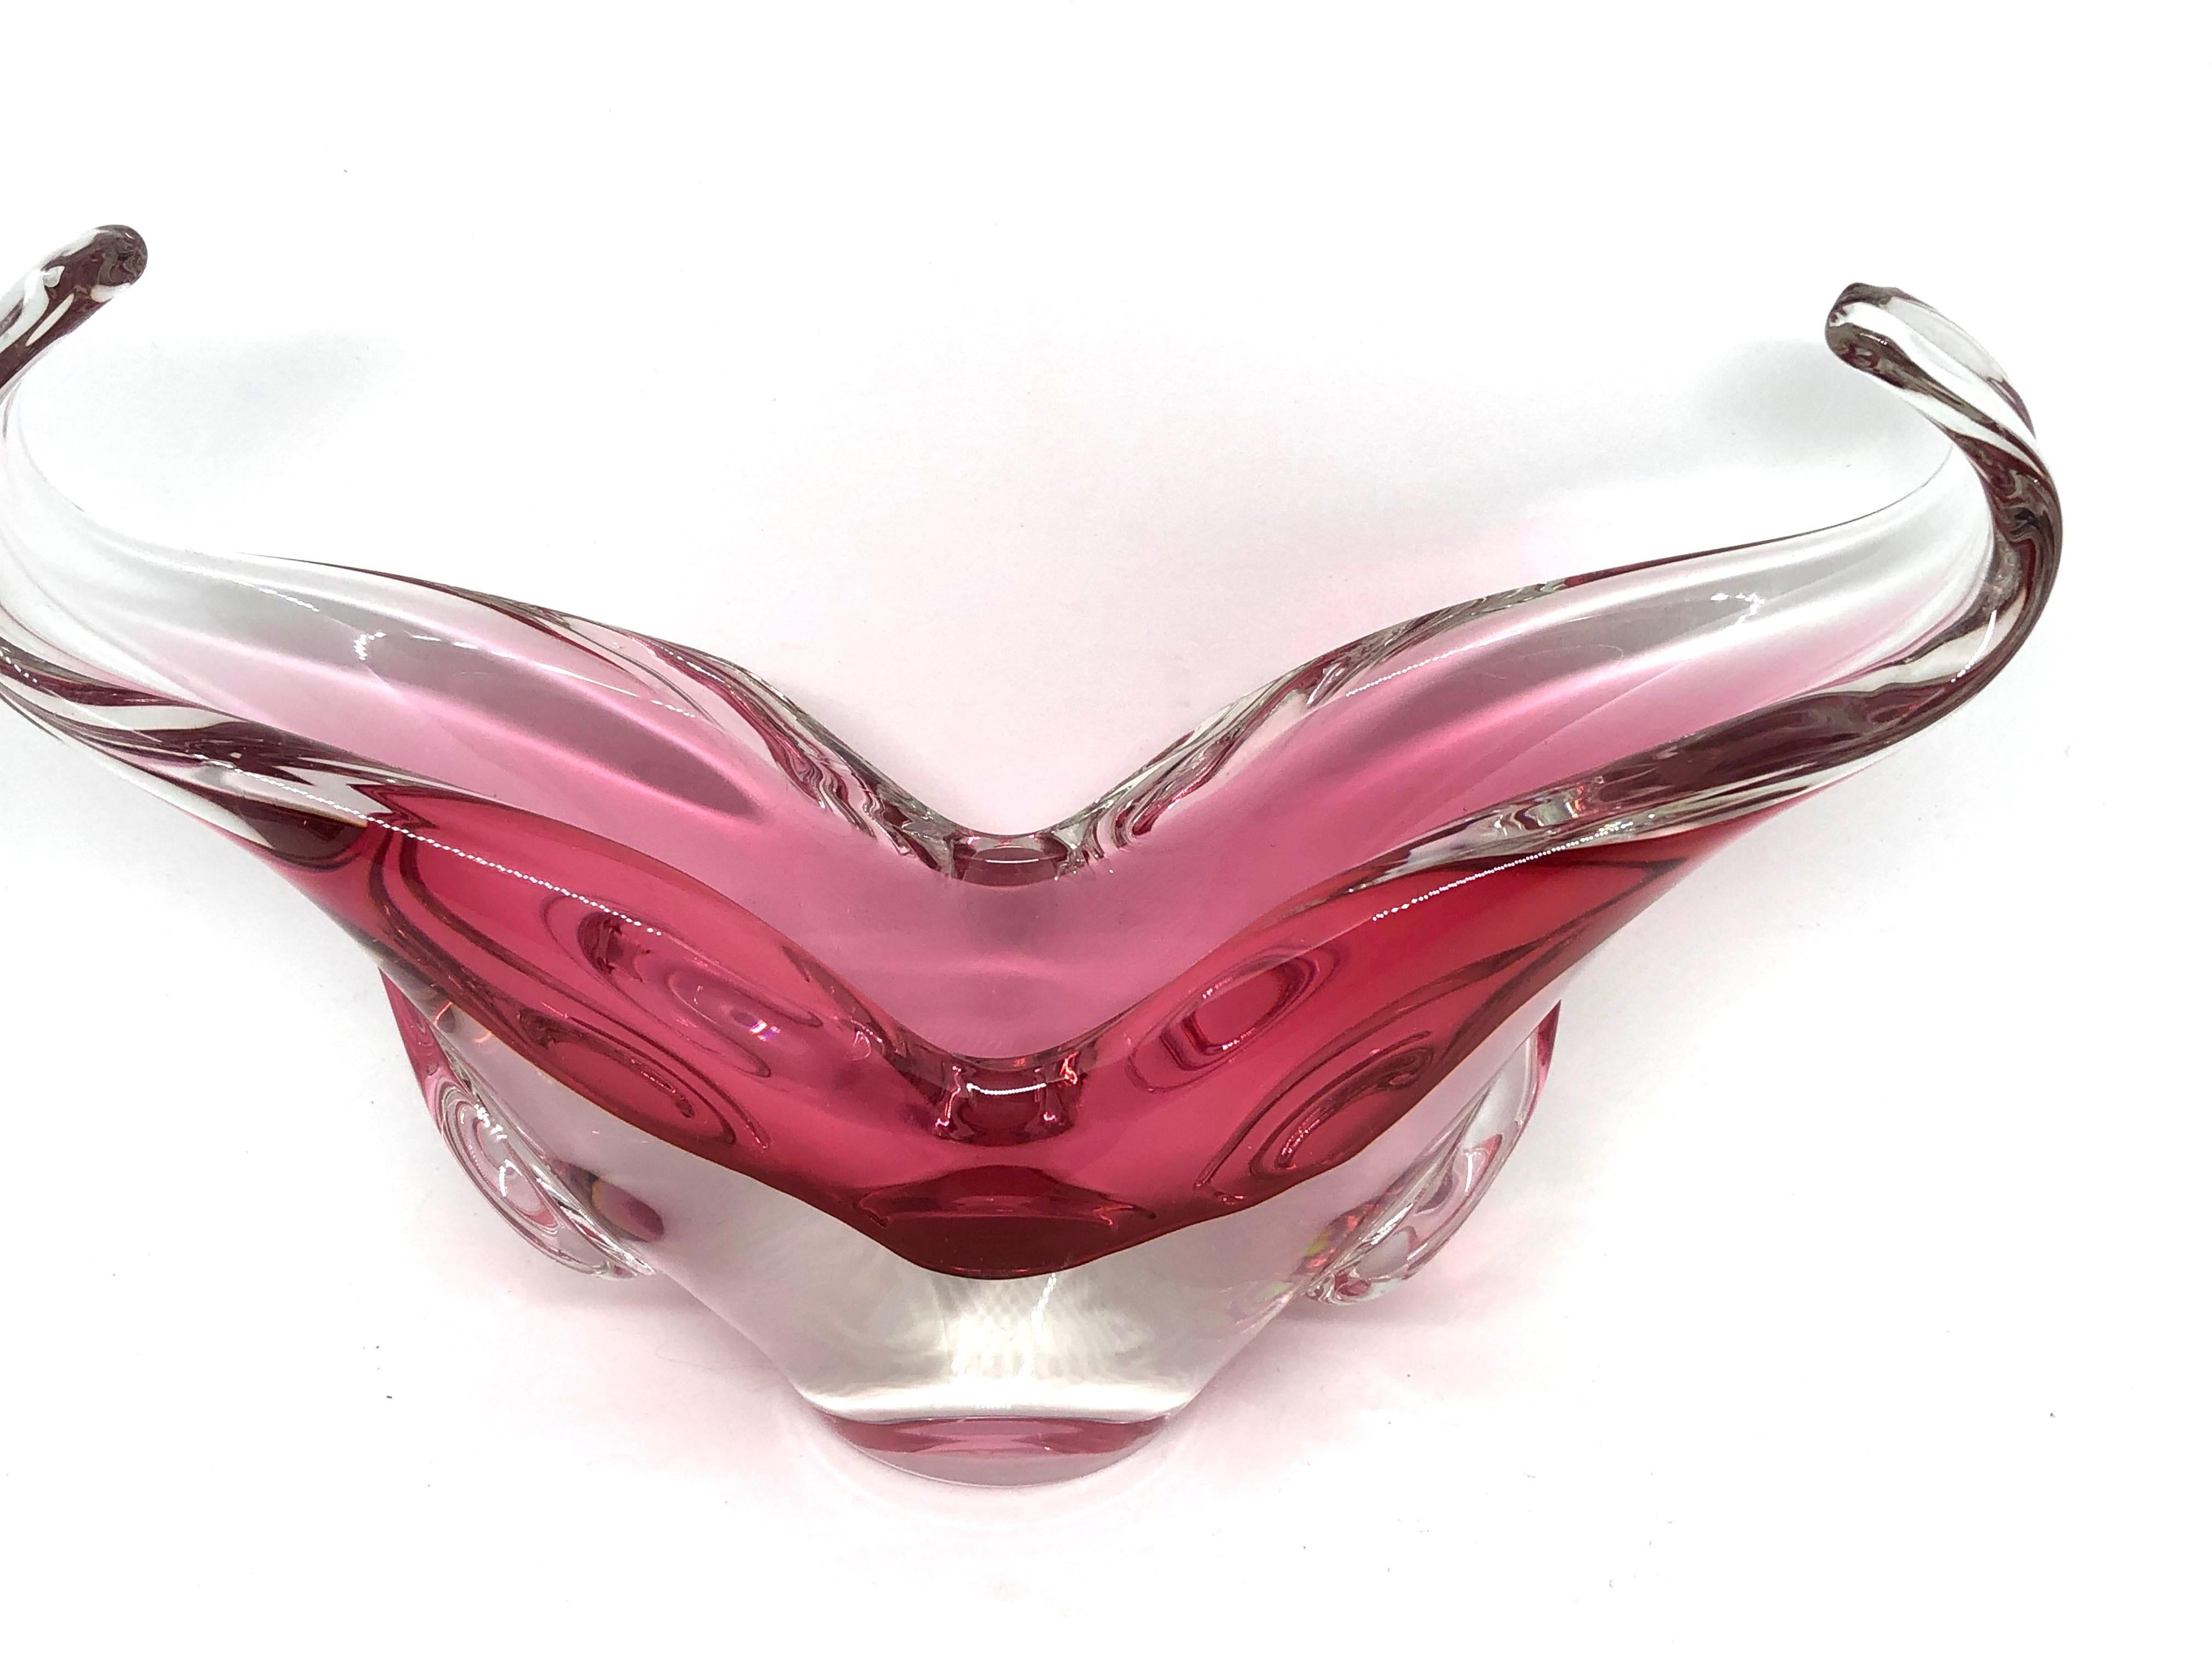 An amazing Venetian Murano glass object in an unusual design and a pretty beautiful pink and clear color. A highly decorative piece useful as center piece, bowl, candy bowl or catchall, Italy, 1970s.